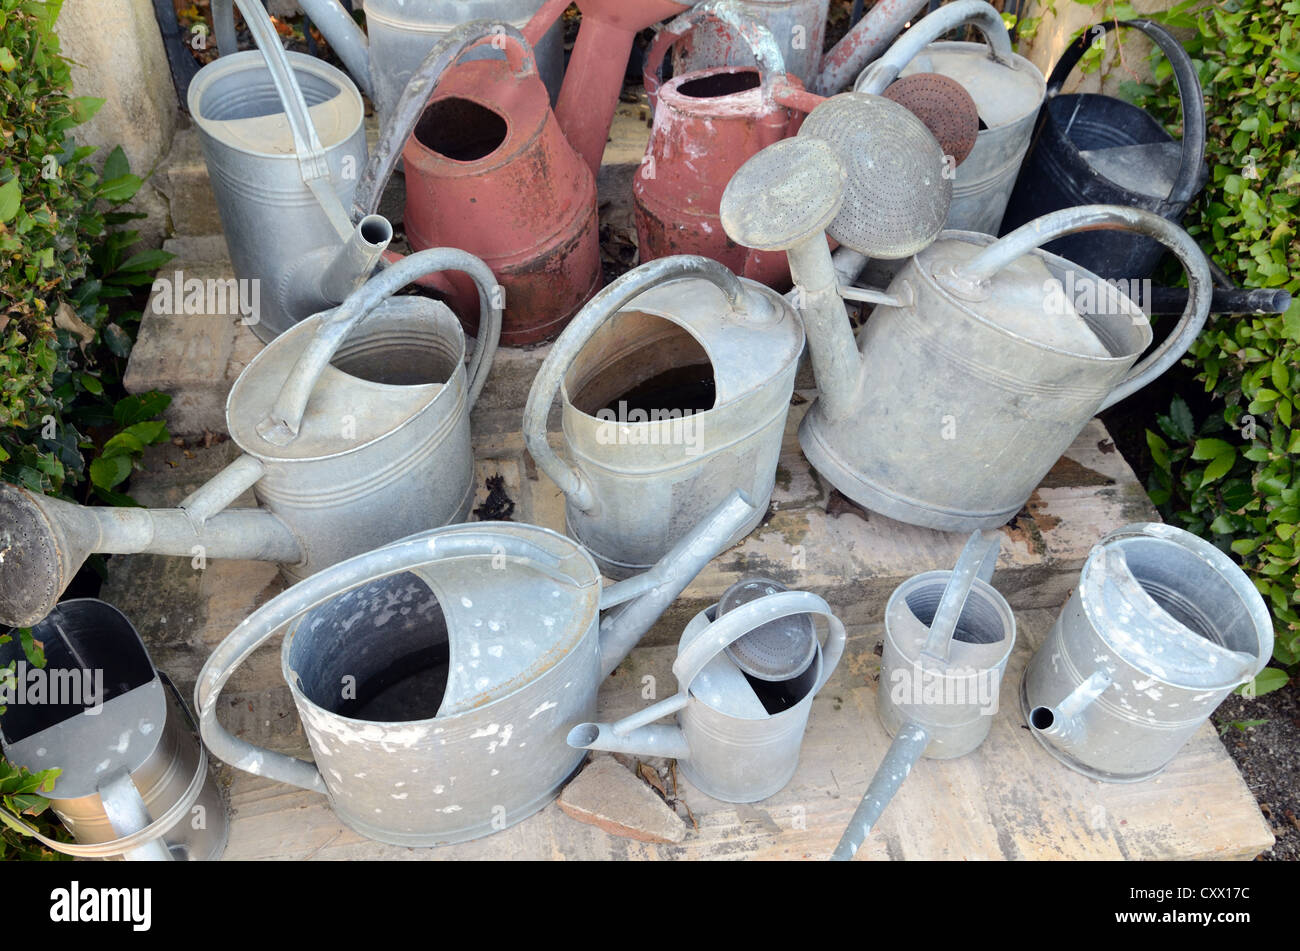 Display of Old Watering Cans Val Joannis Gardens Pertuis Luberon Provence France Stock Photo